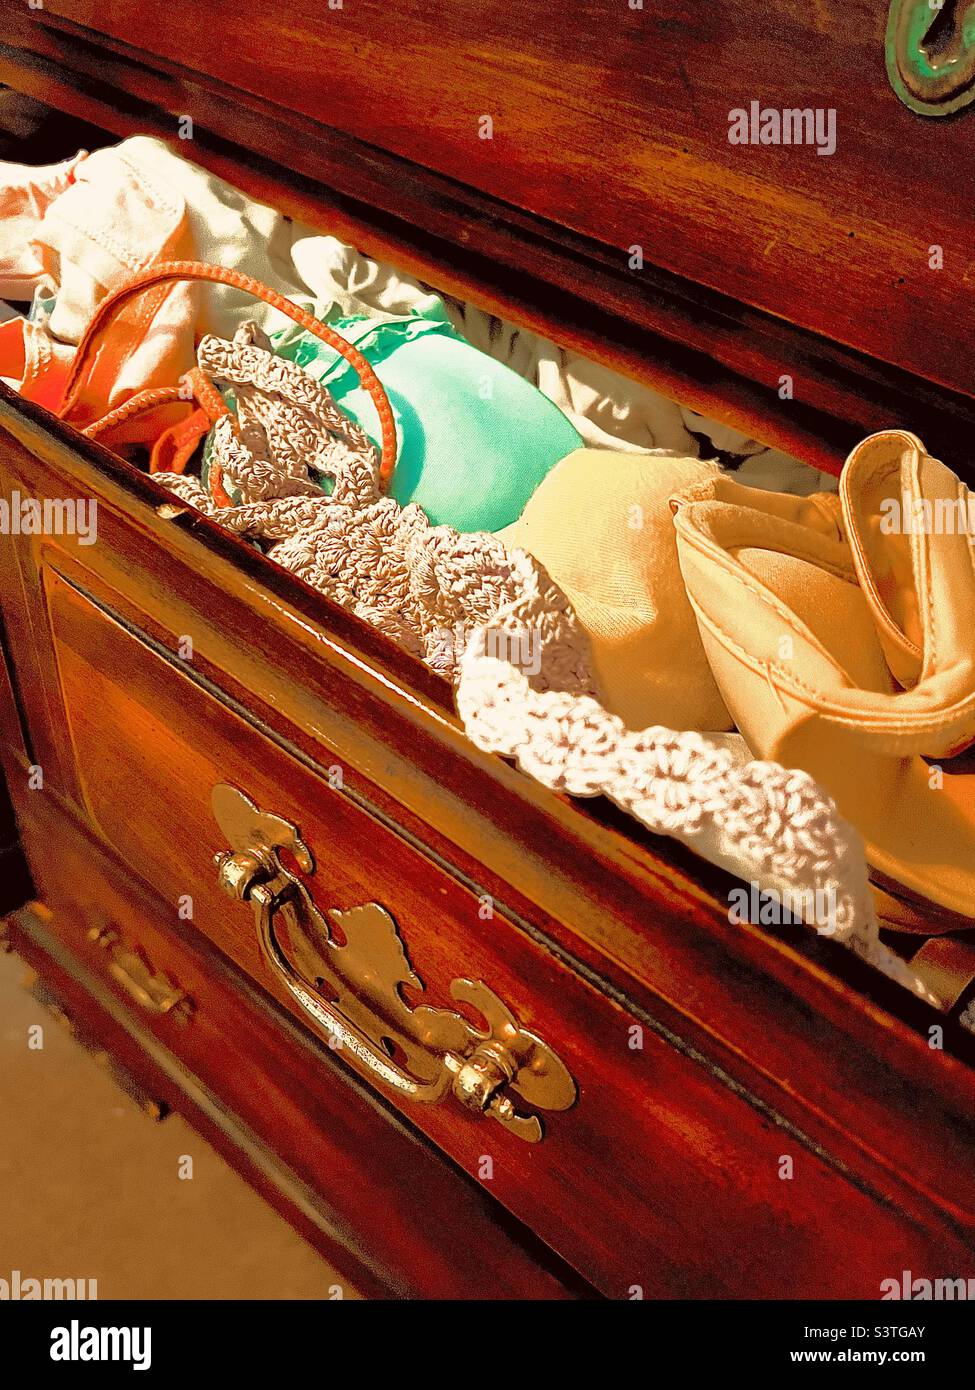 Woman’s dresser with open bras and panties drawer Stock Photo